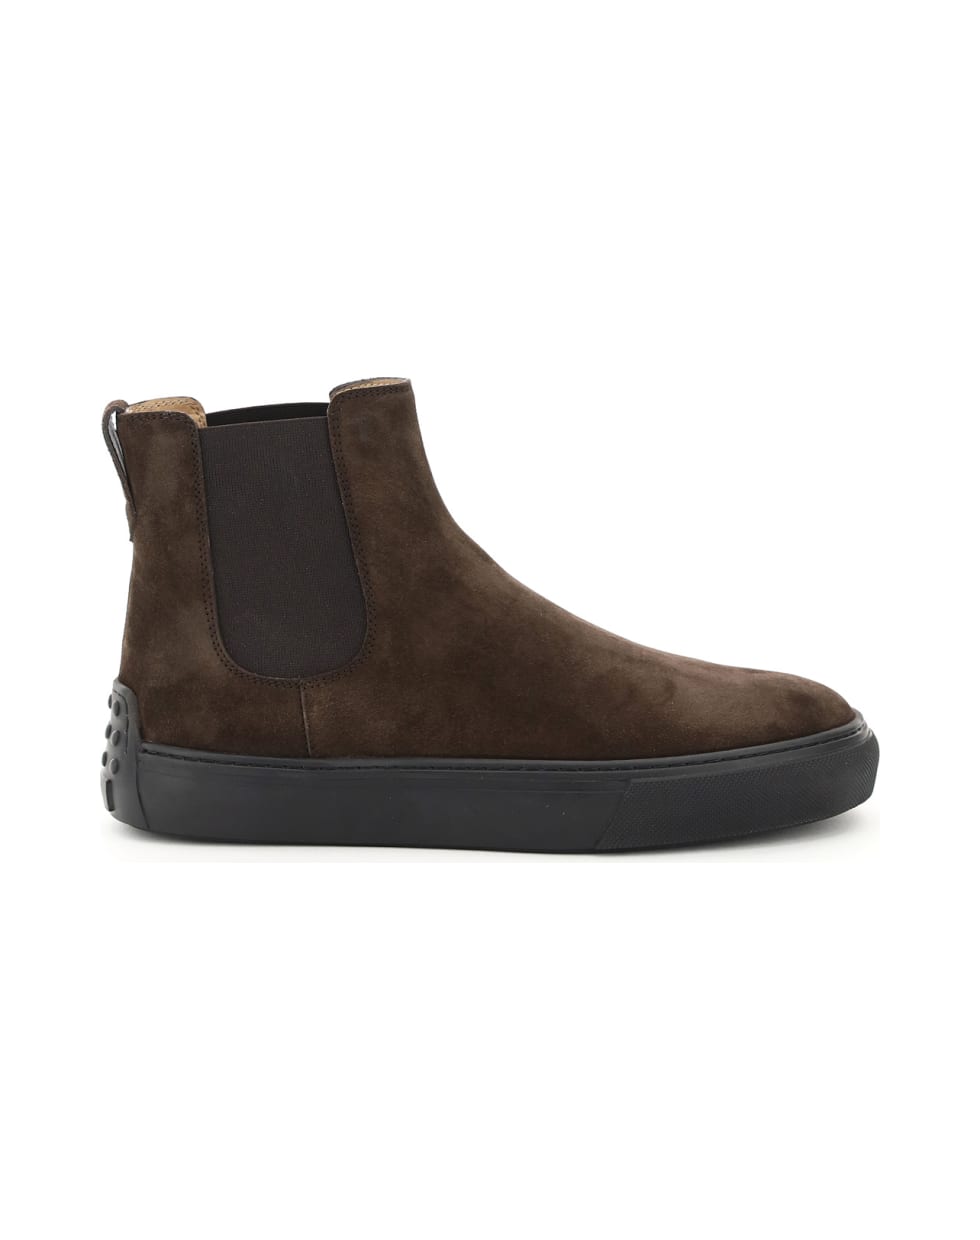 Tod's Chelsea Casual Boots - TESTA MORO (Brown)